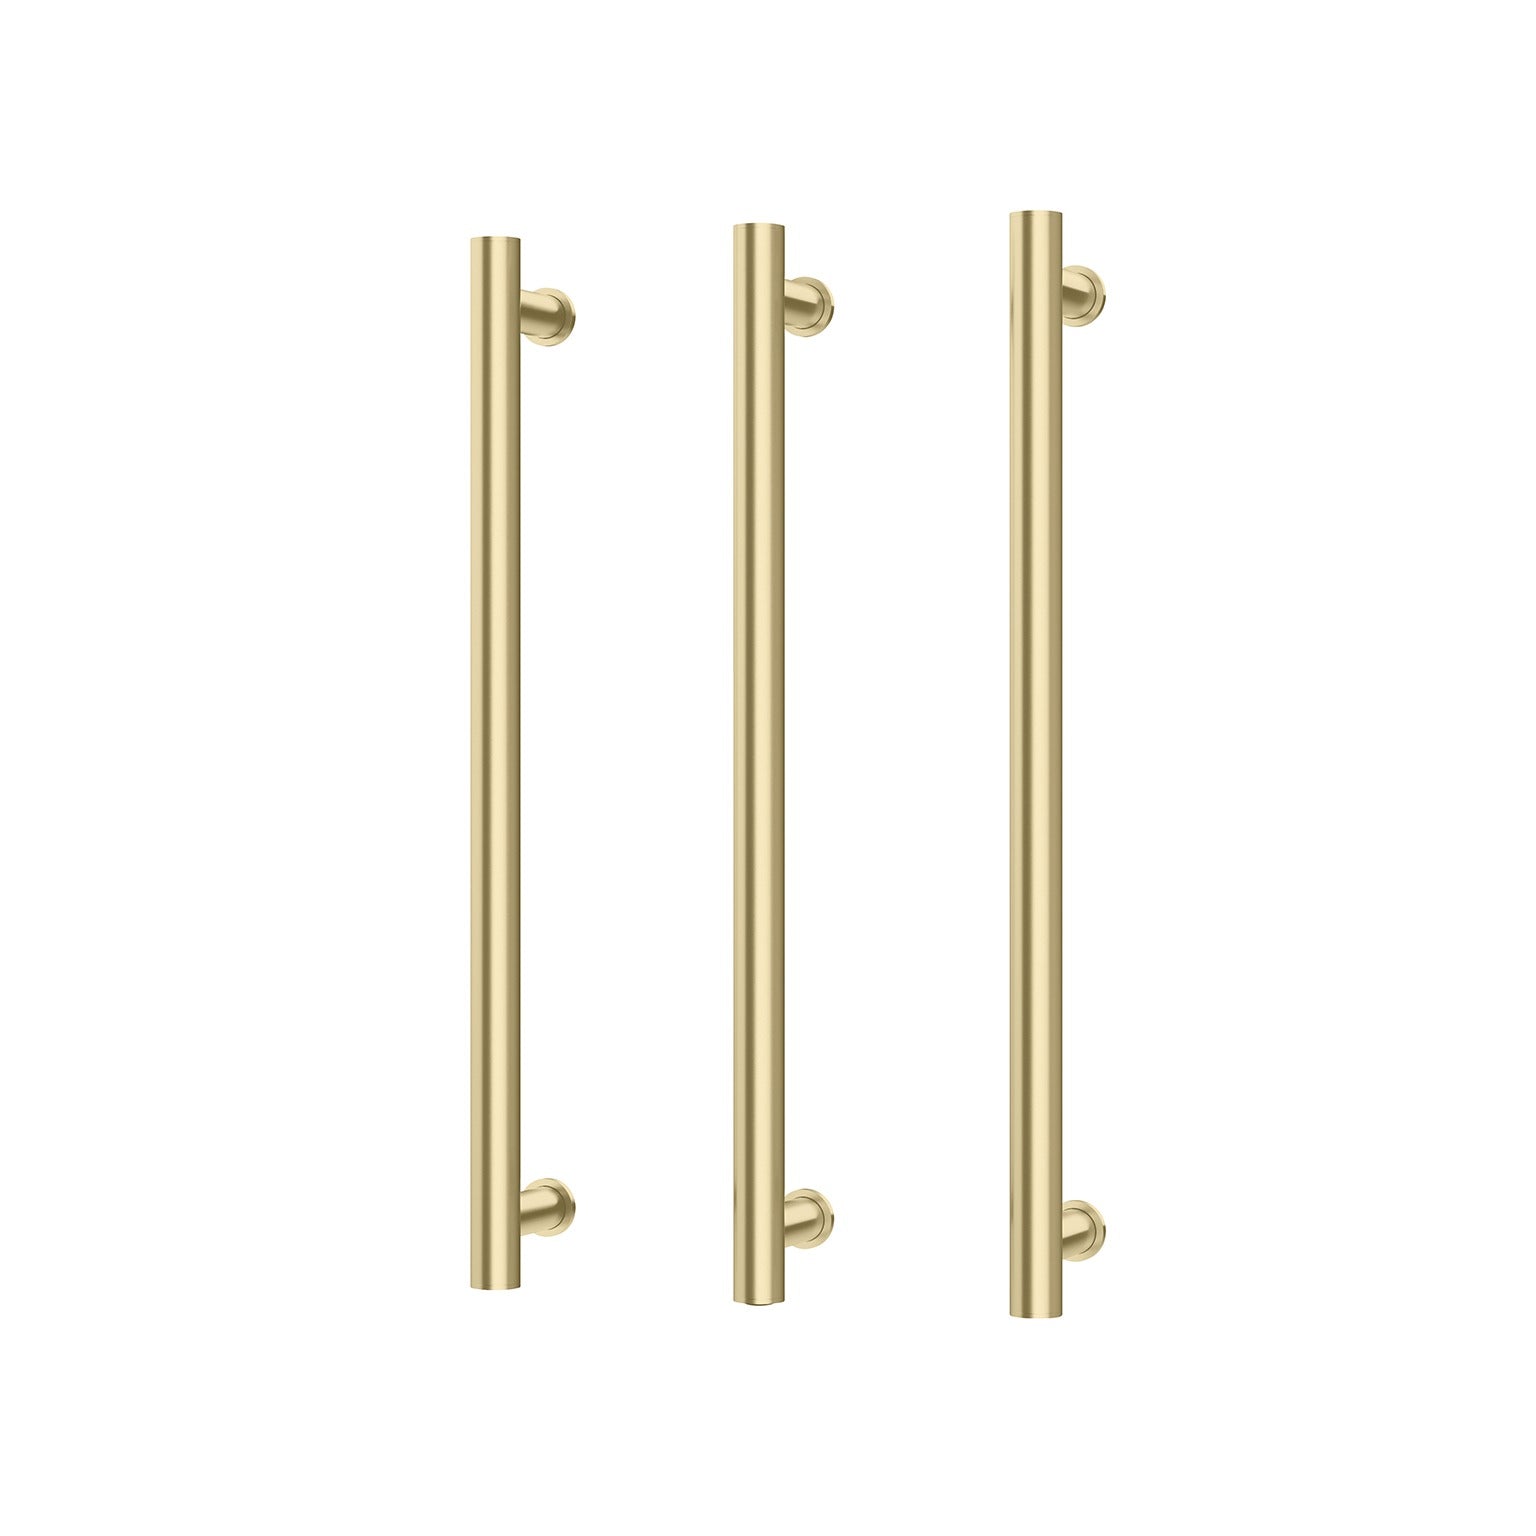 PHOENIX ROUND TRIPLE HEATED TOWEL RAIL BRUSHED GOLD (AVAILABLE IN 600MM AND 800MM)